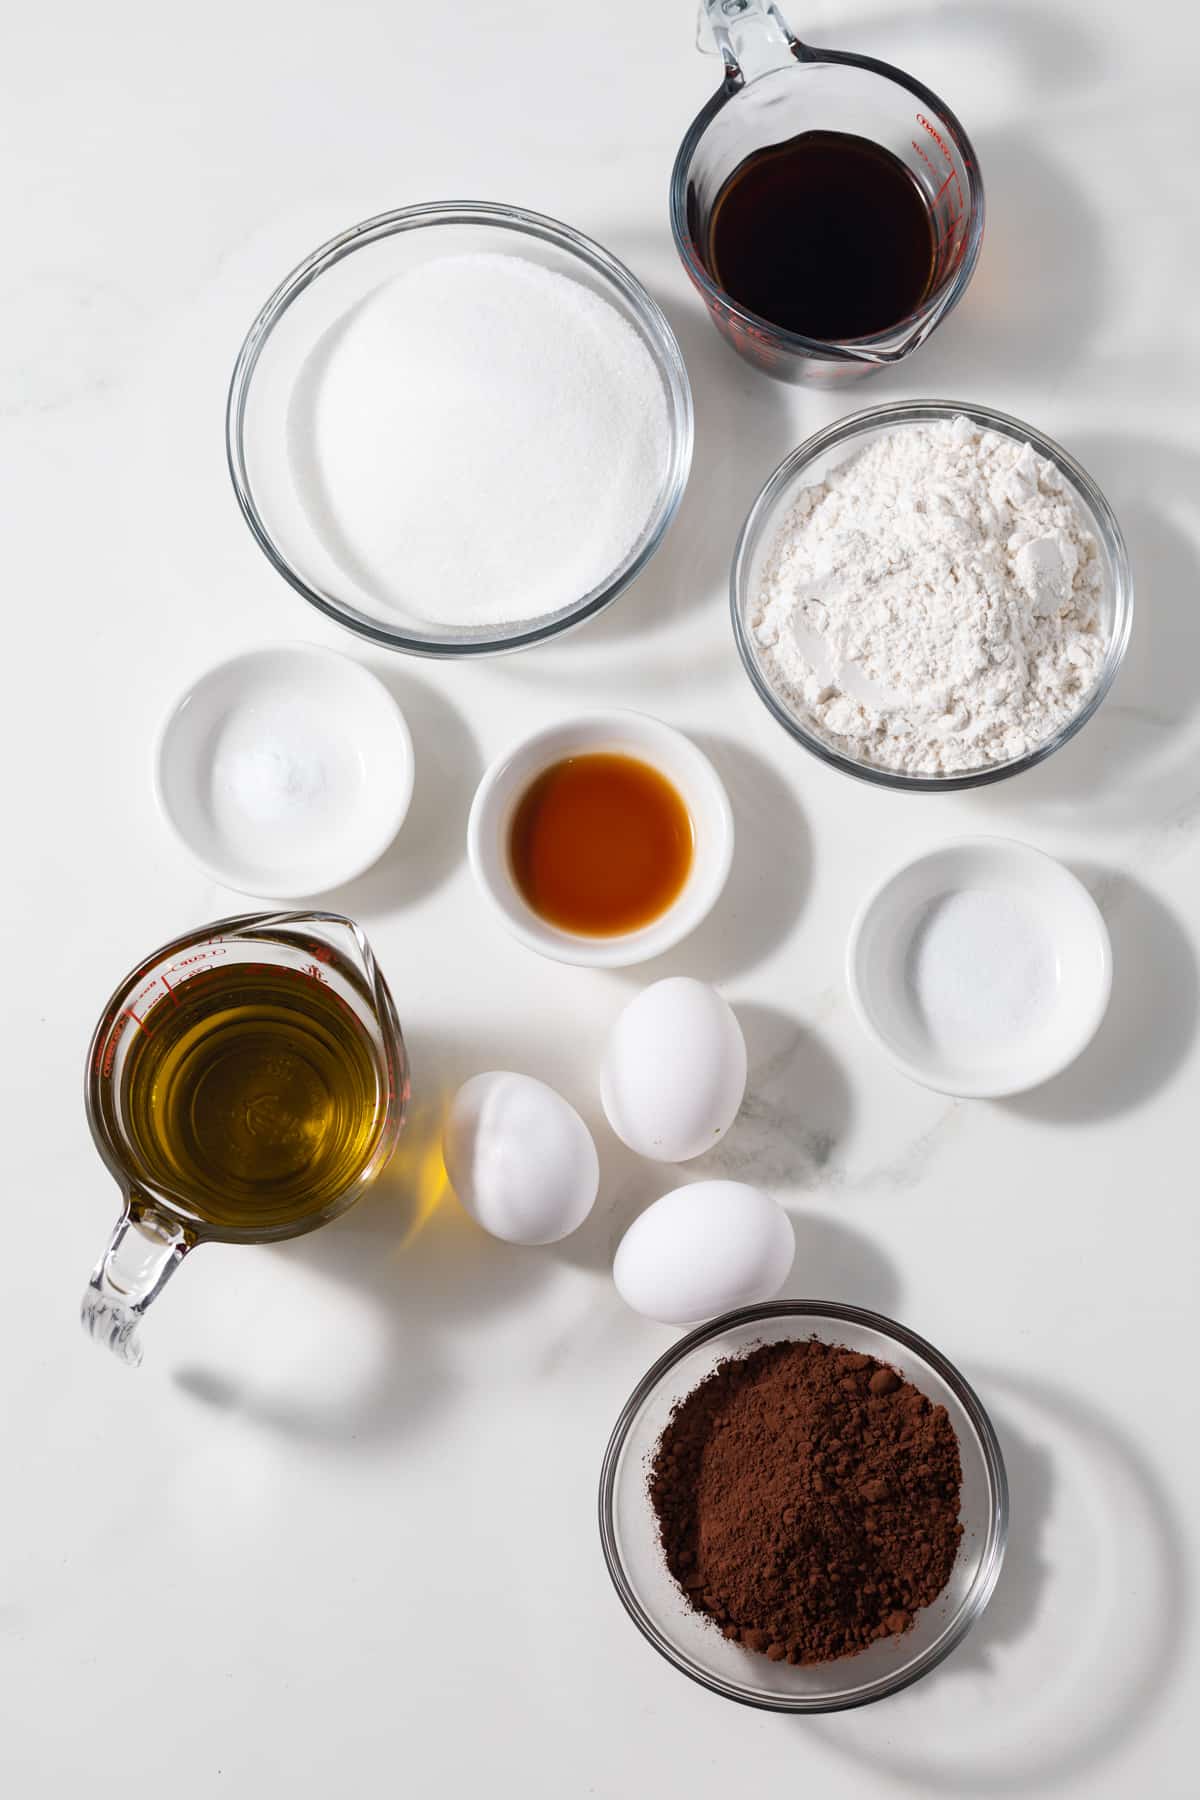 Ingredients for chocolate olive oil cake in glass bowls.